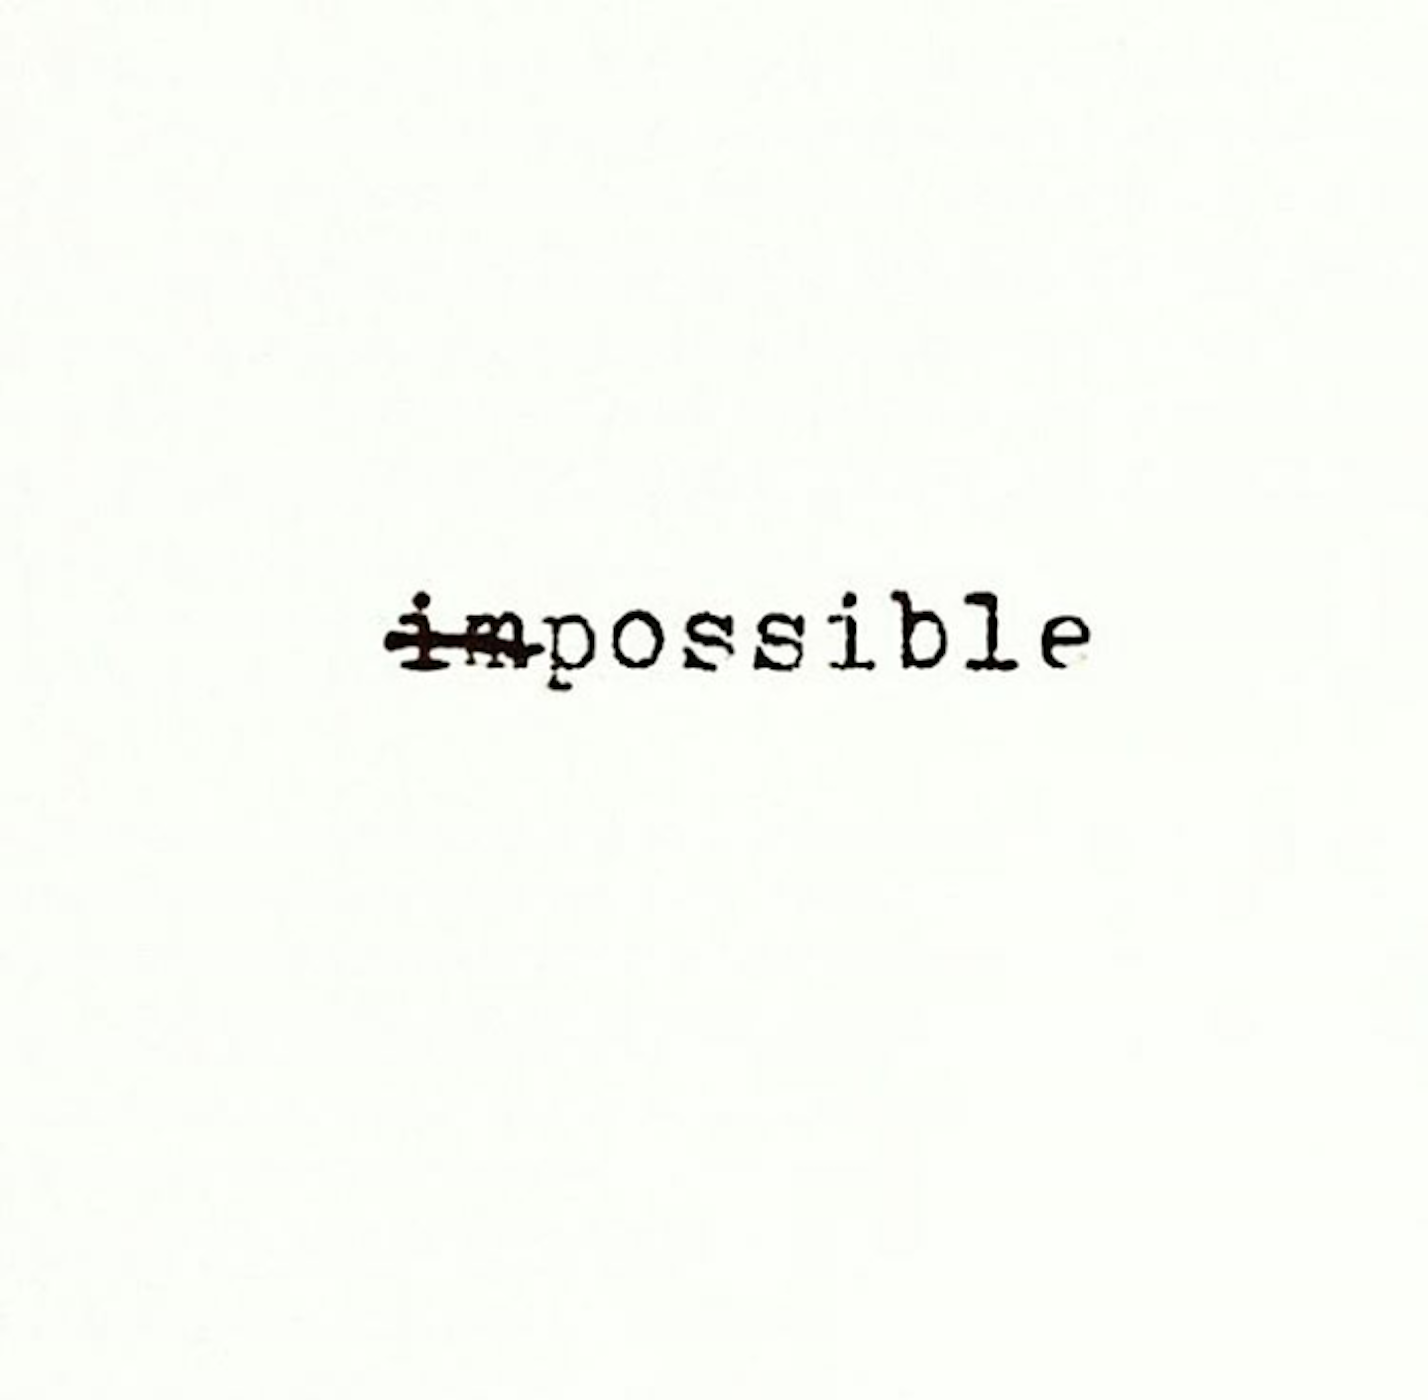 Impossible possible. Impossible надпись. Impossible is possible. Nothing is Impossible обои на телефон. Картинка Impossible possible.